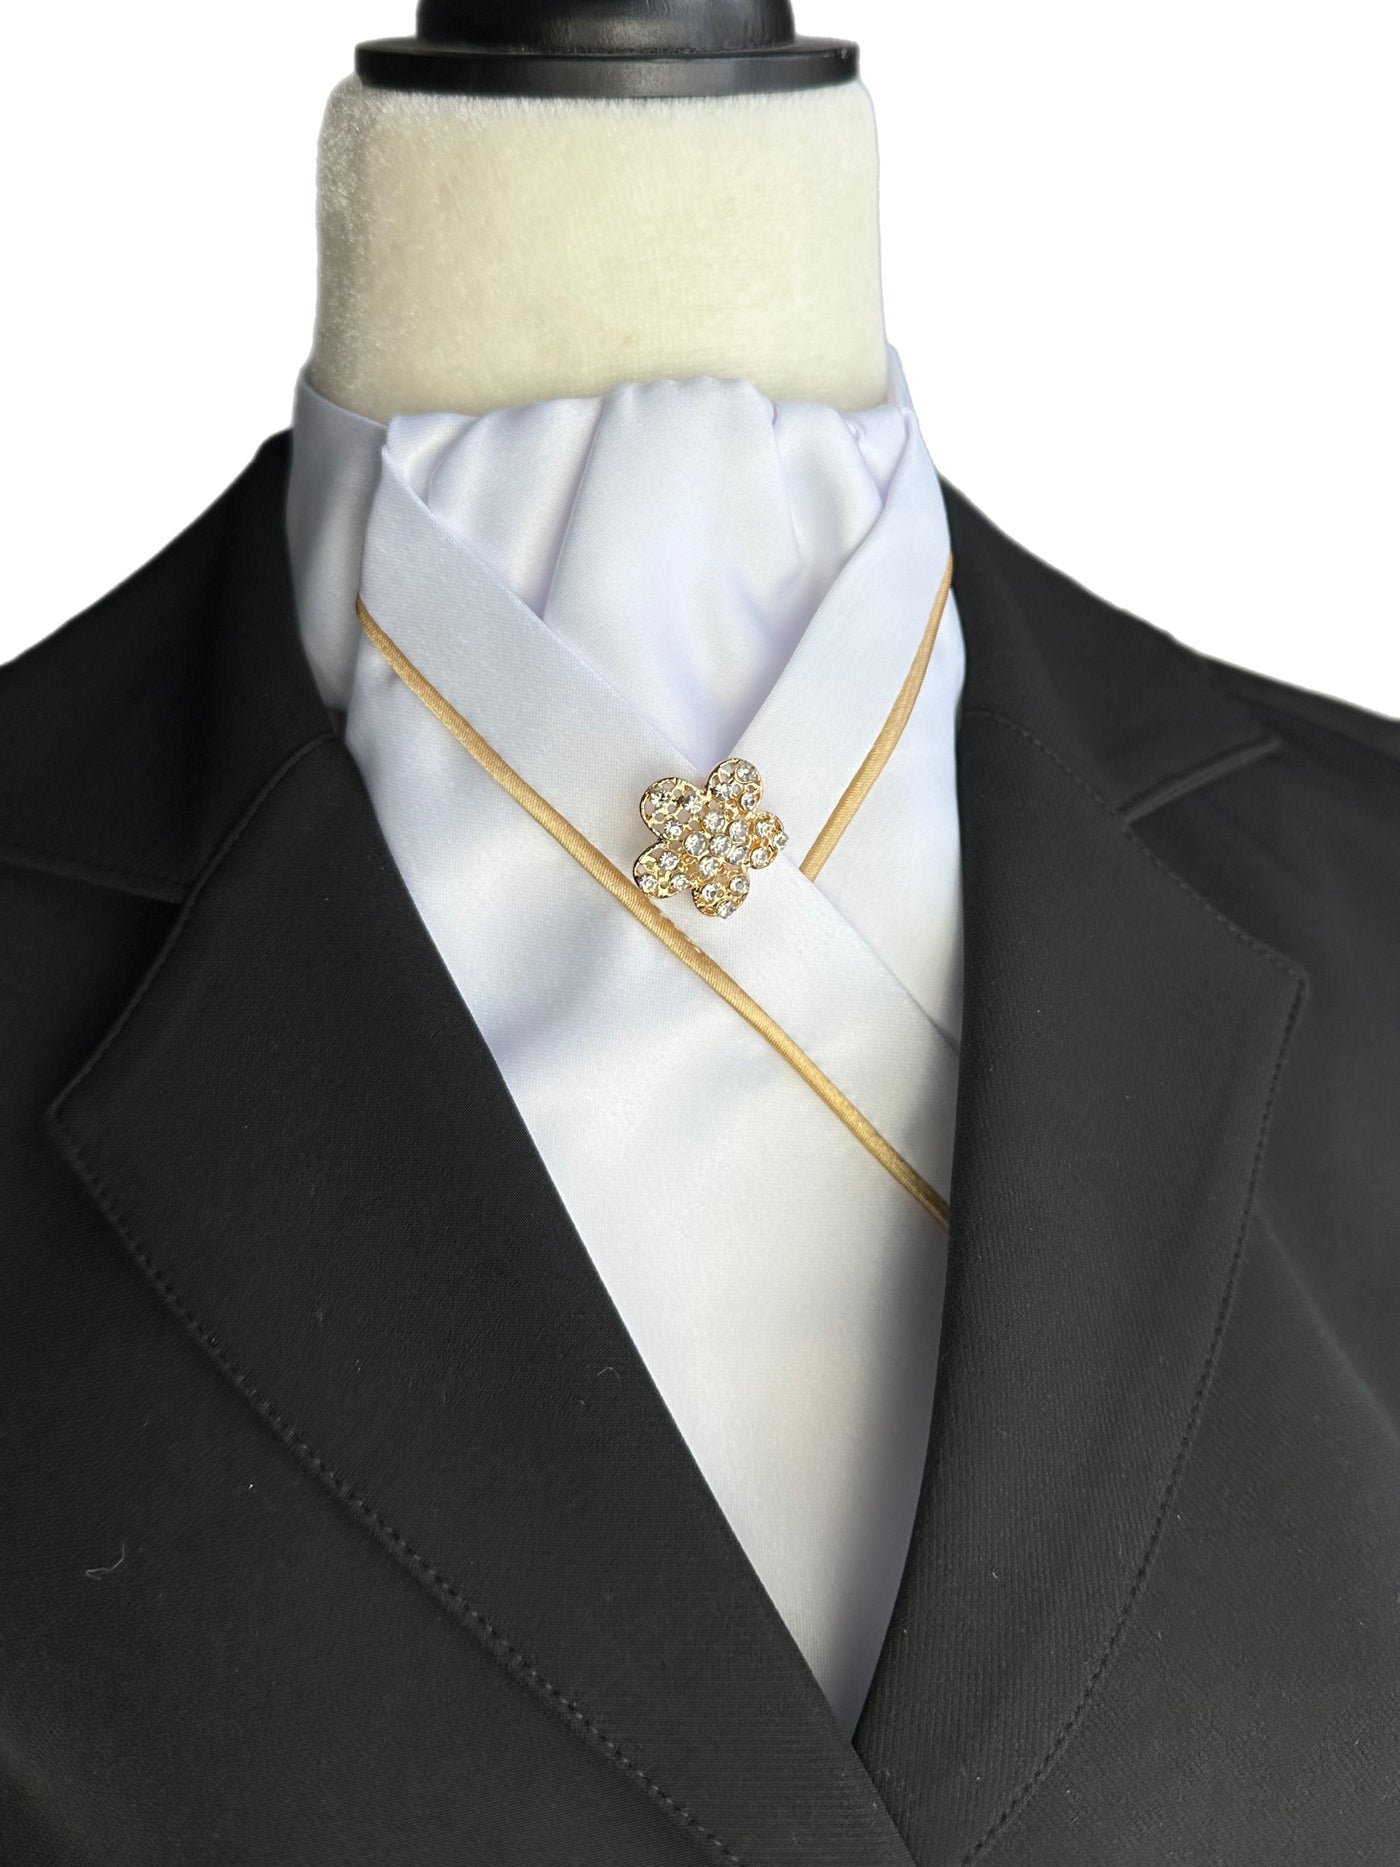 Stock tie with Gold Piping